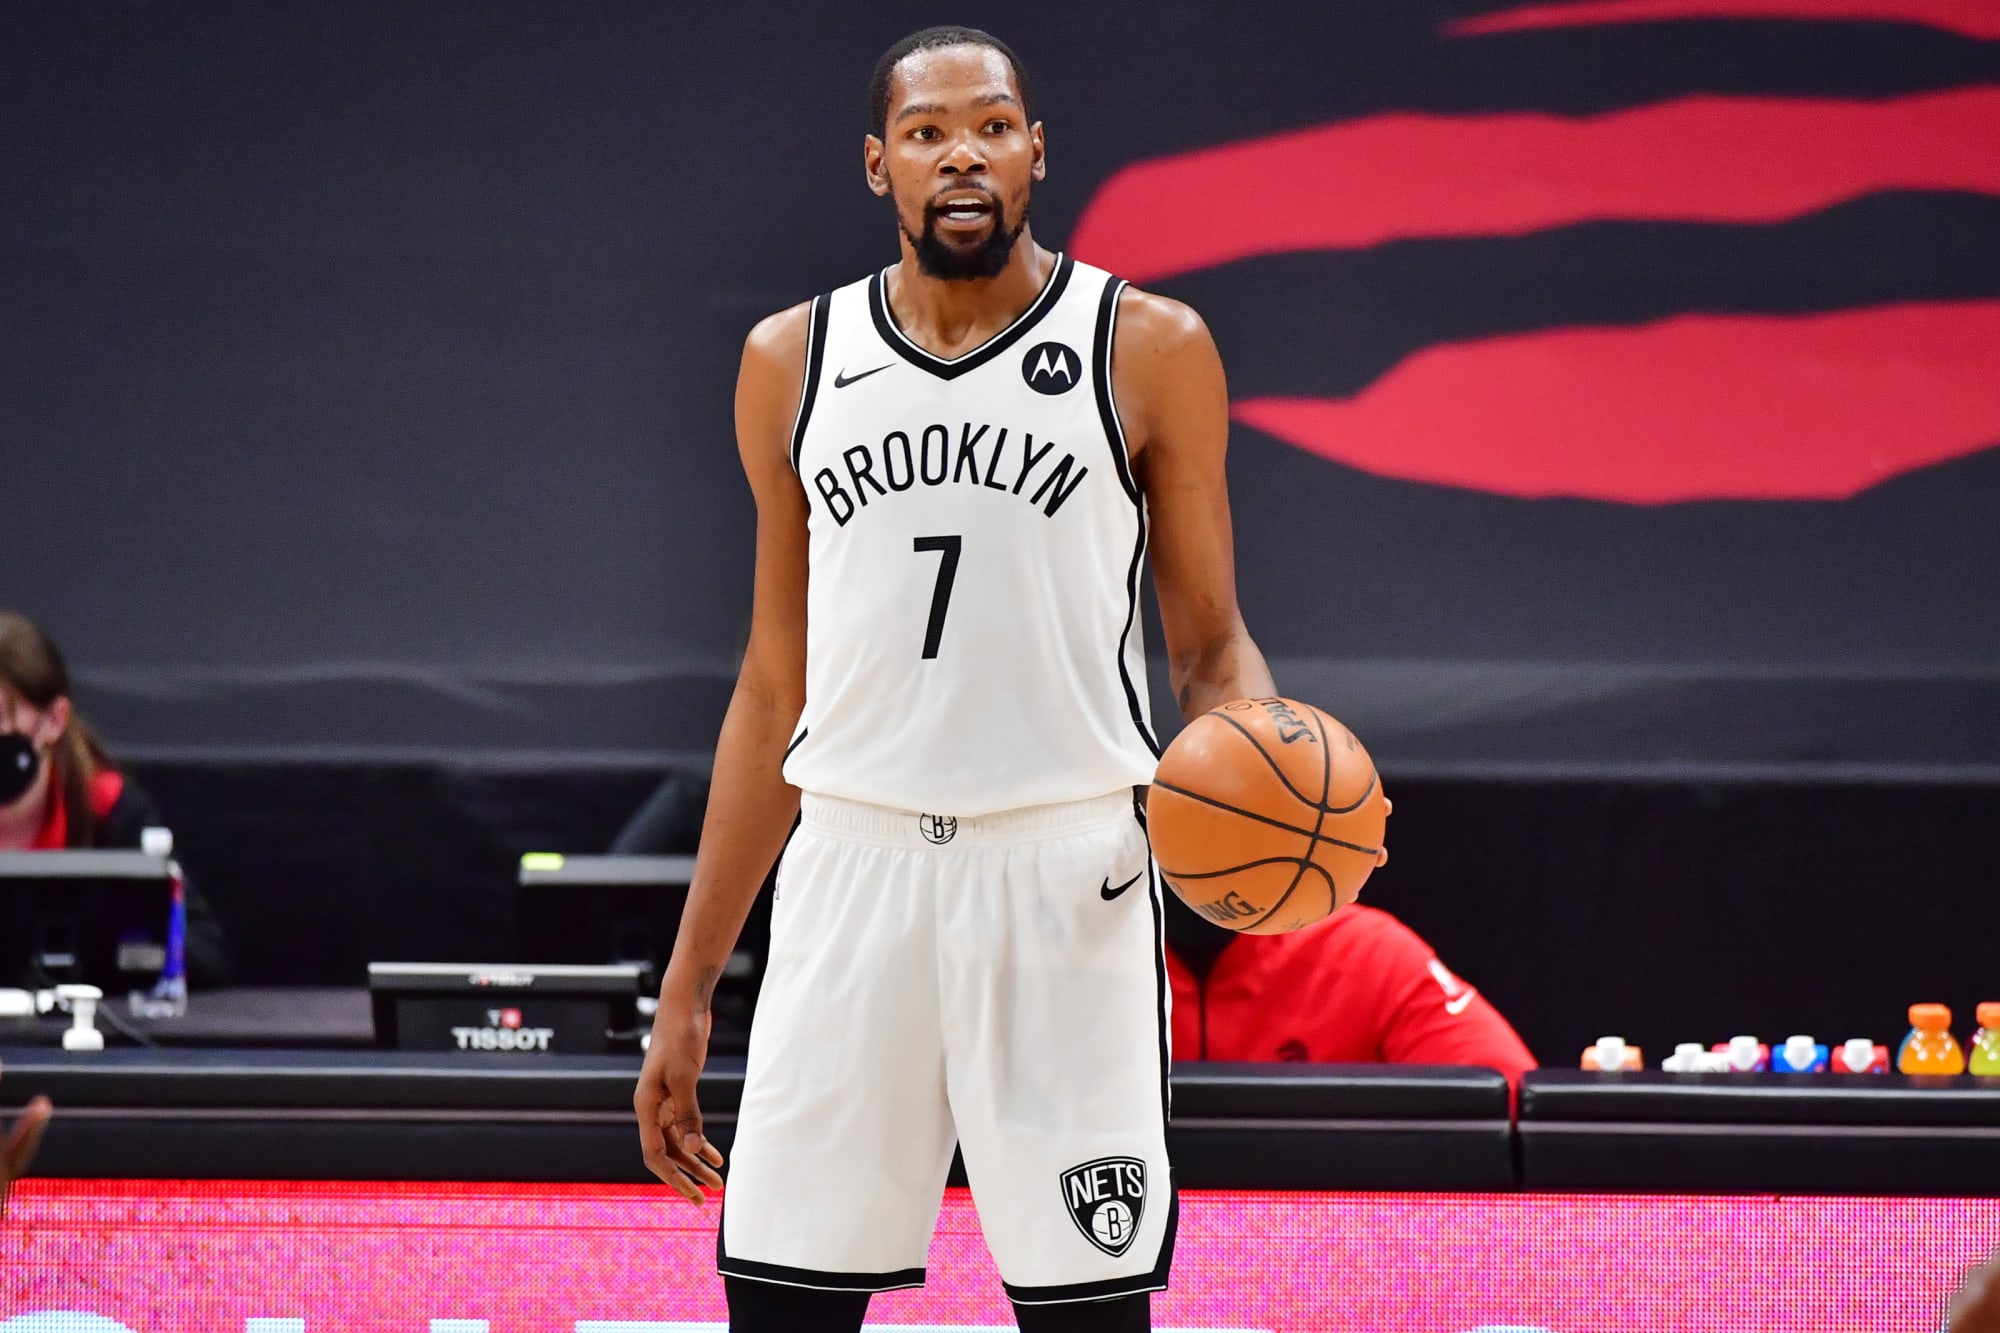 Toronto Raptors: The case for and against trading for Kevin Durant